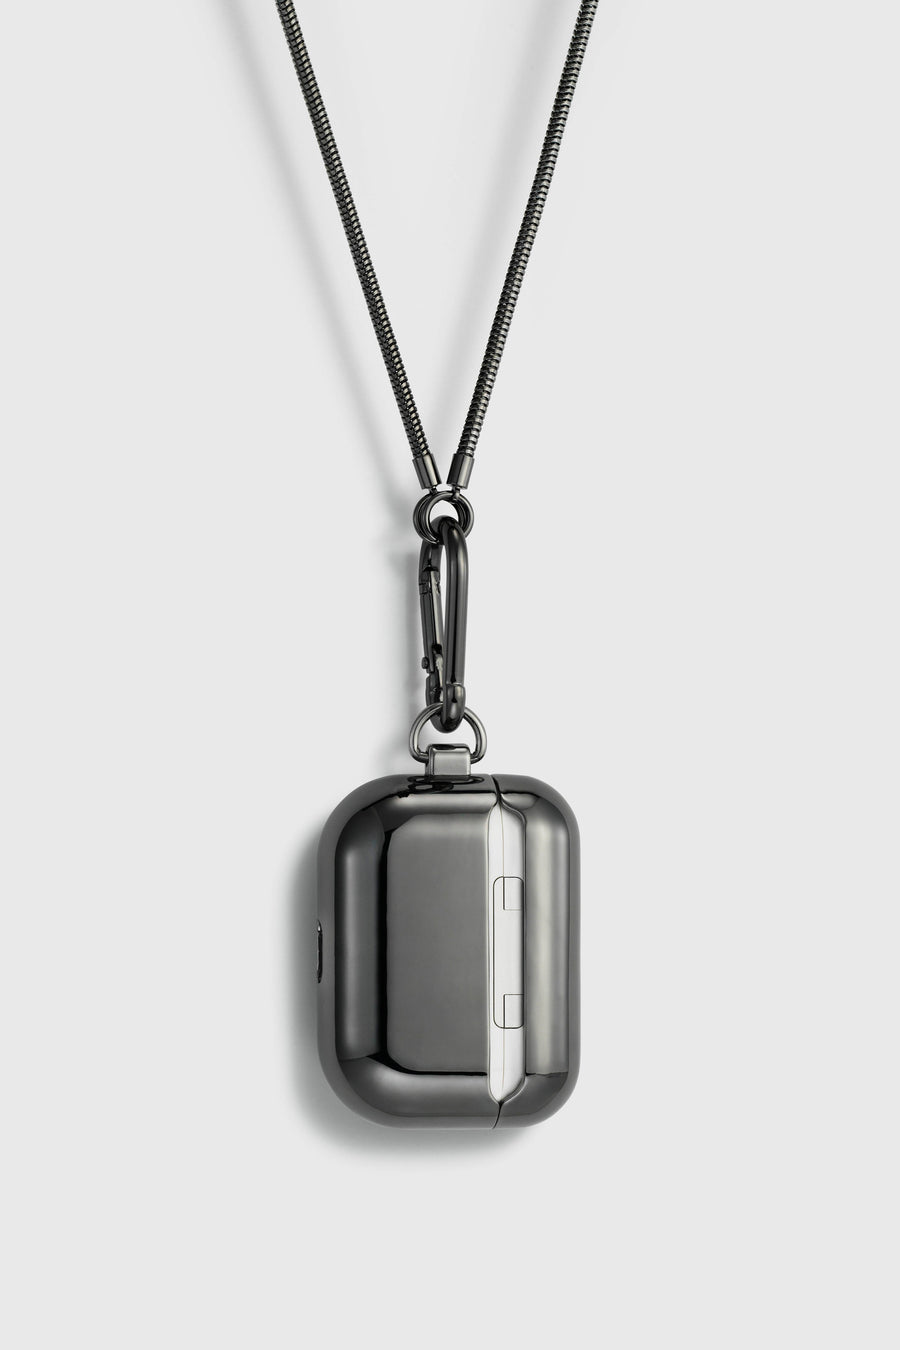 Tapper's real hematite black plated original metal neck case tech jewelry protects and keeps your Apple AirPods Pro close at hand. The luxurious, elevated and accessible neck case plated in precious metals steps up your AirPods Pro jewellery game. Worried about losing your AirPods? Detachable snake chain and carabiner for convenient and hassle-free safekeeping around your neck. The next must-have accessory crafted for ultimate luxury. Compatible with AirPods Pro. Designed in Sweden. Free Express Shipping.